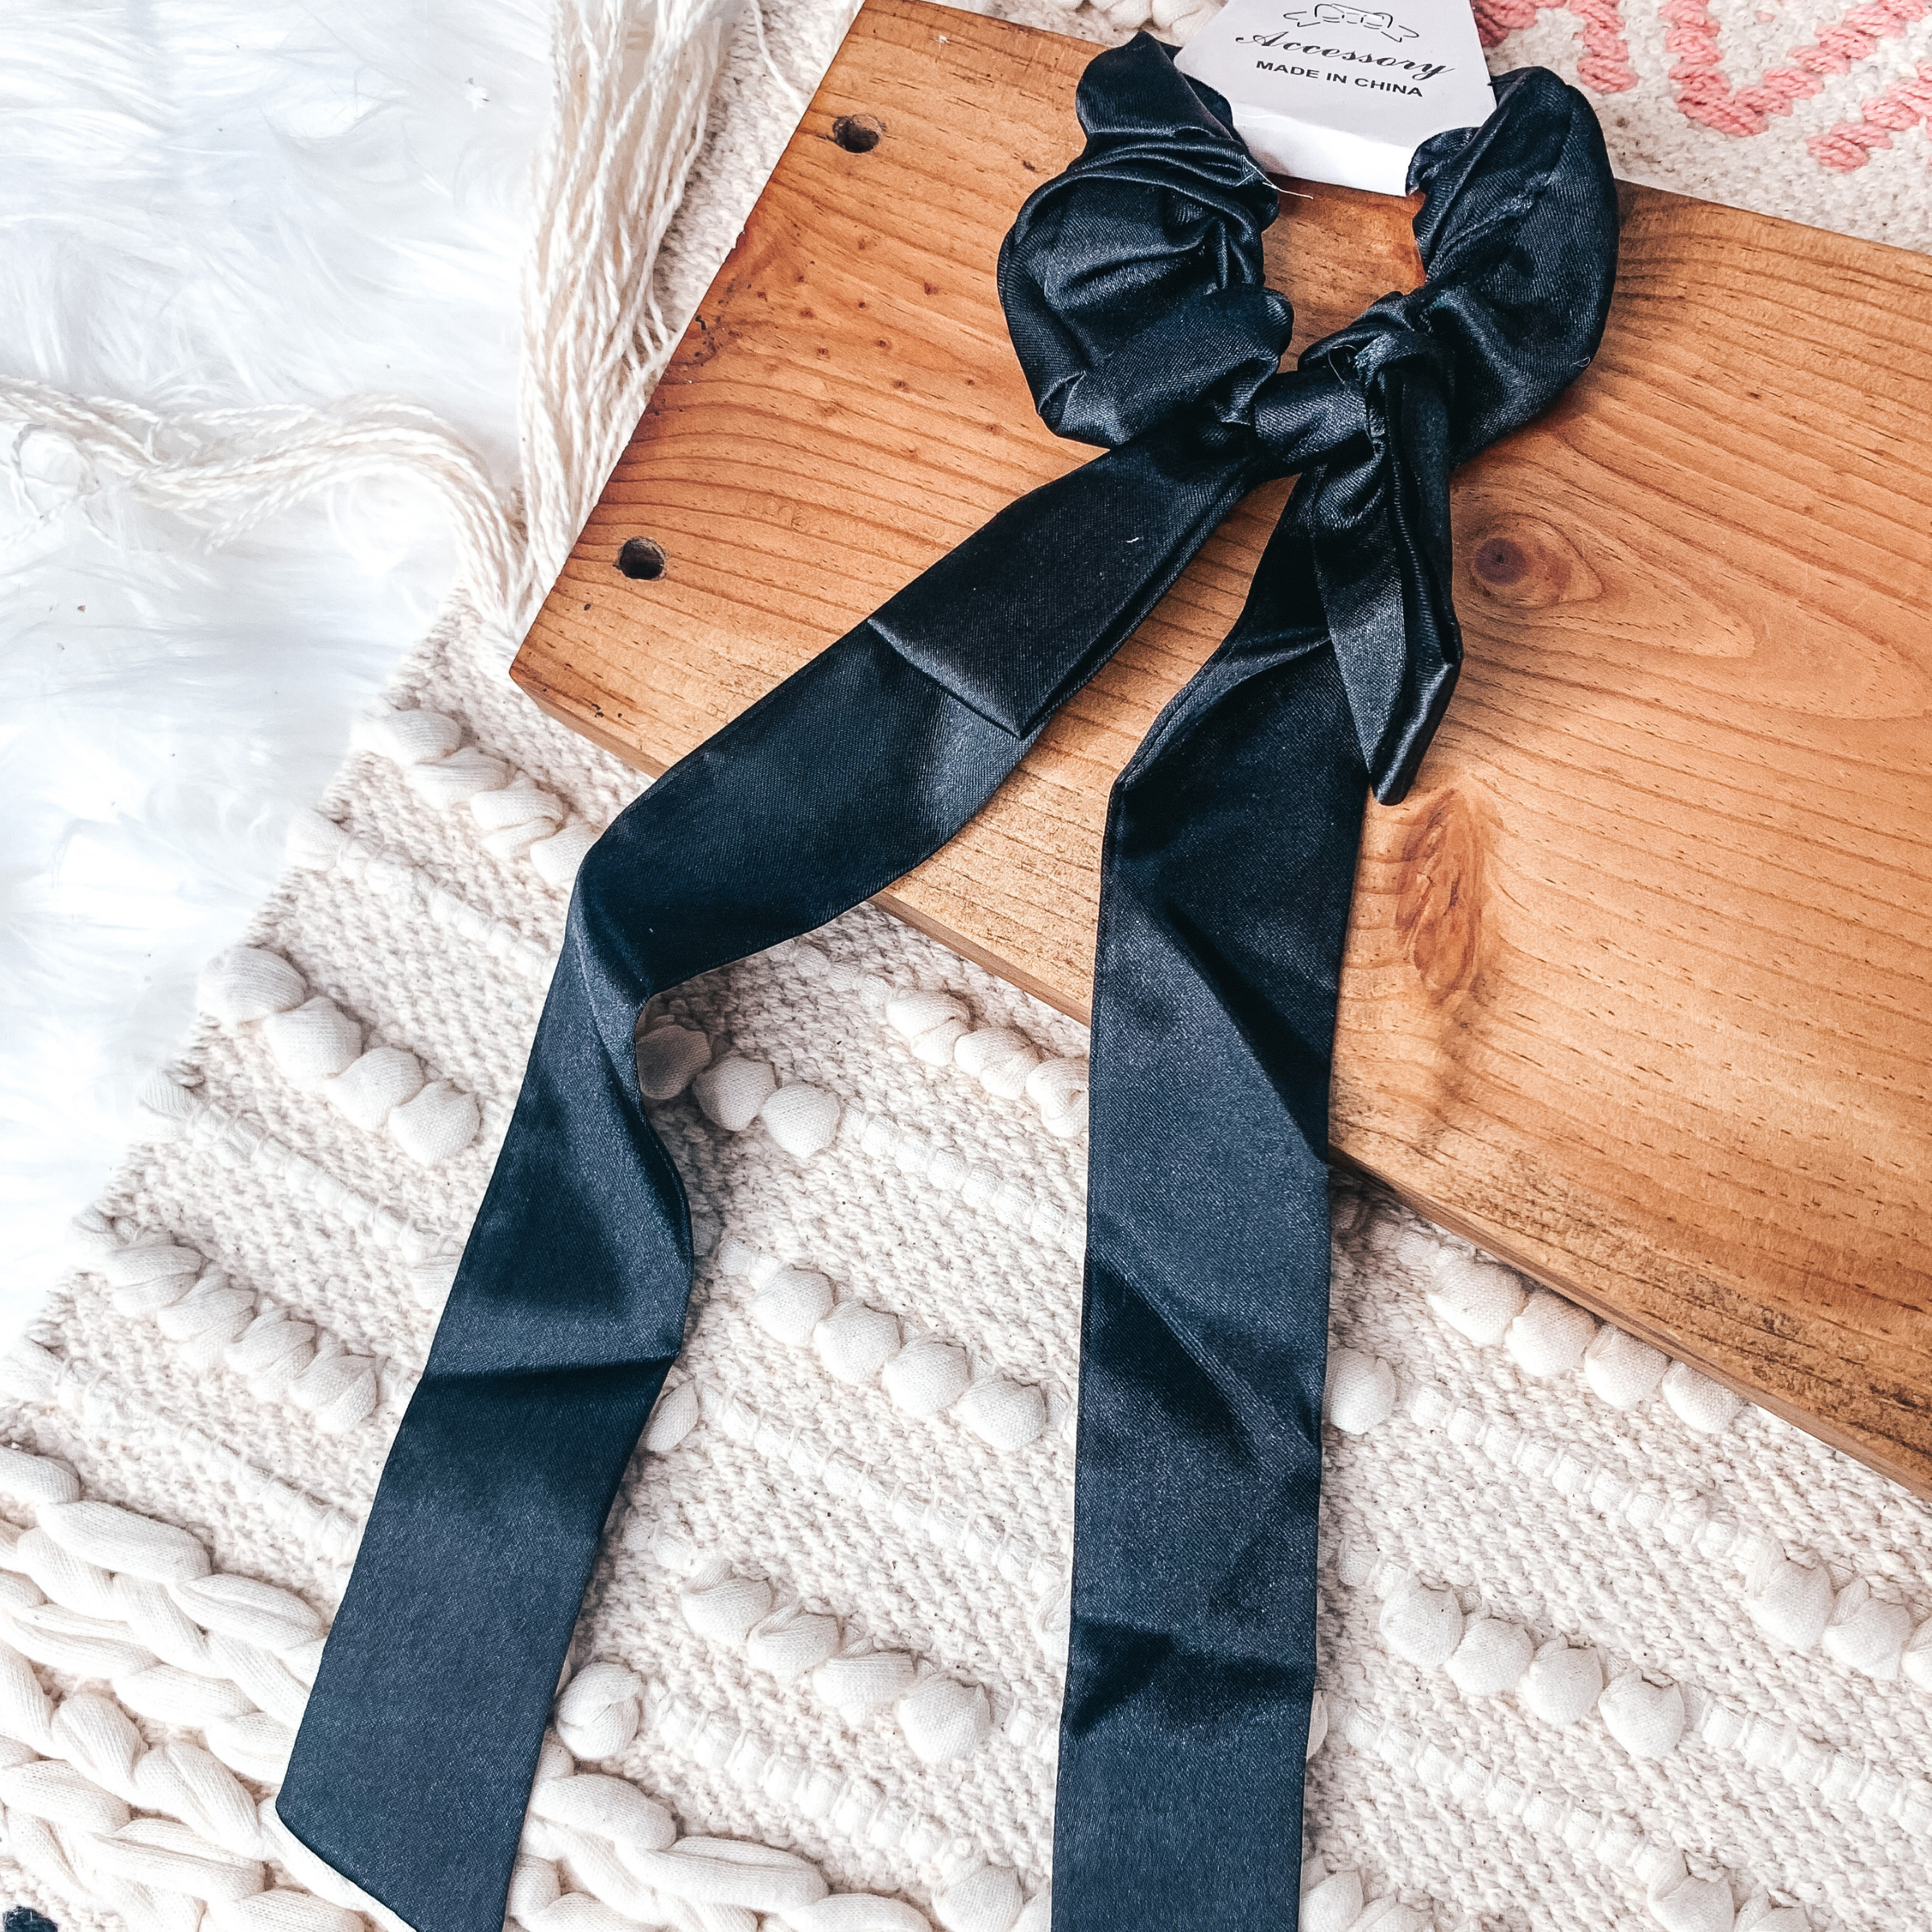 Buy 3 for $10 | Satin Ribbon Hair Scrunchie - Giddy Up Glamour Boutique